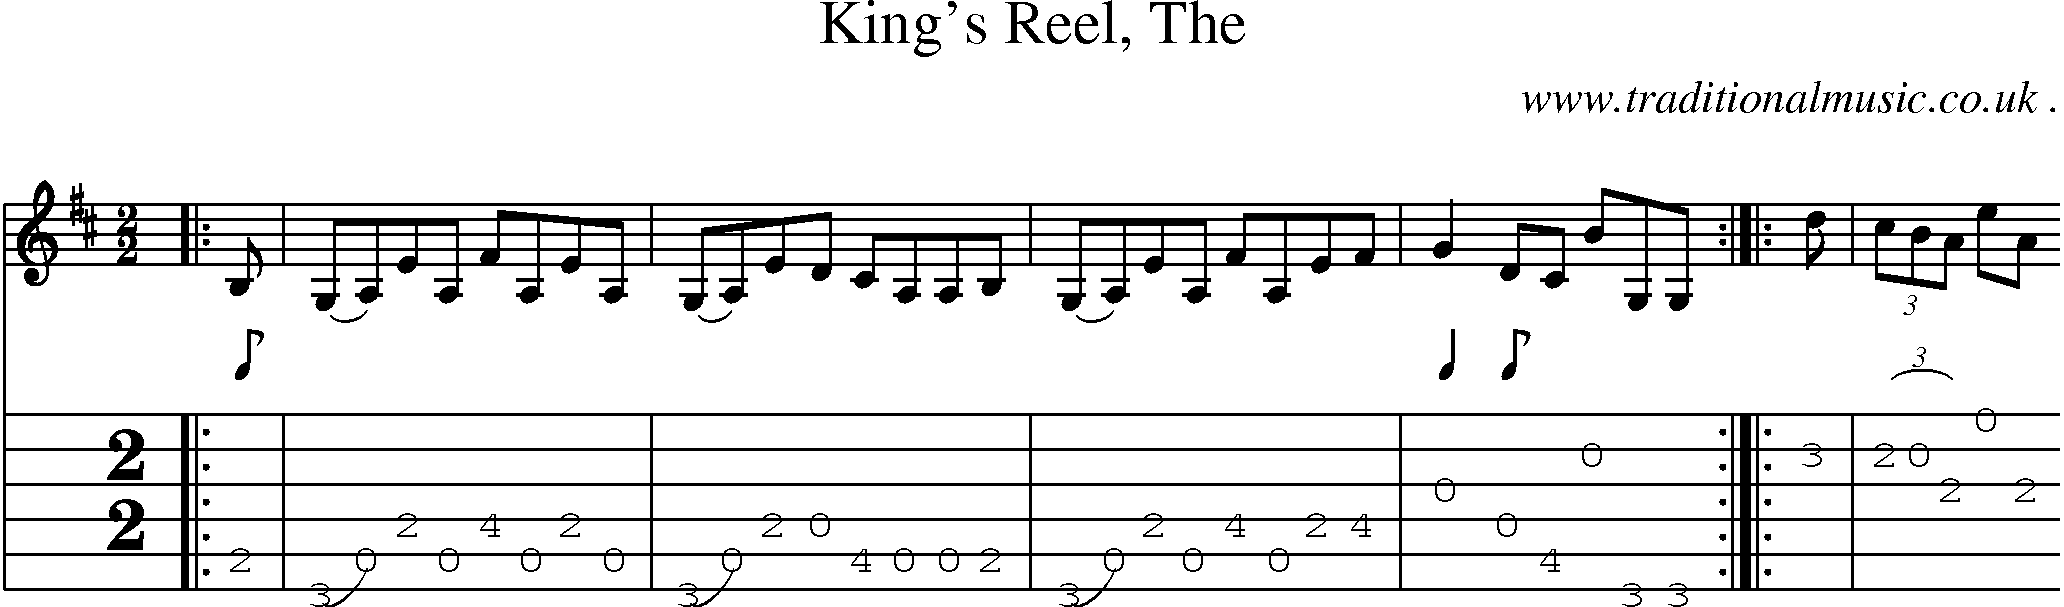 Sheet-music  score, Chords and Guitar Tabs for Kings Reel The